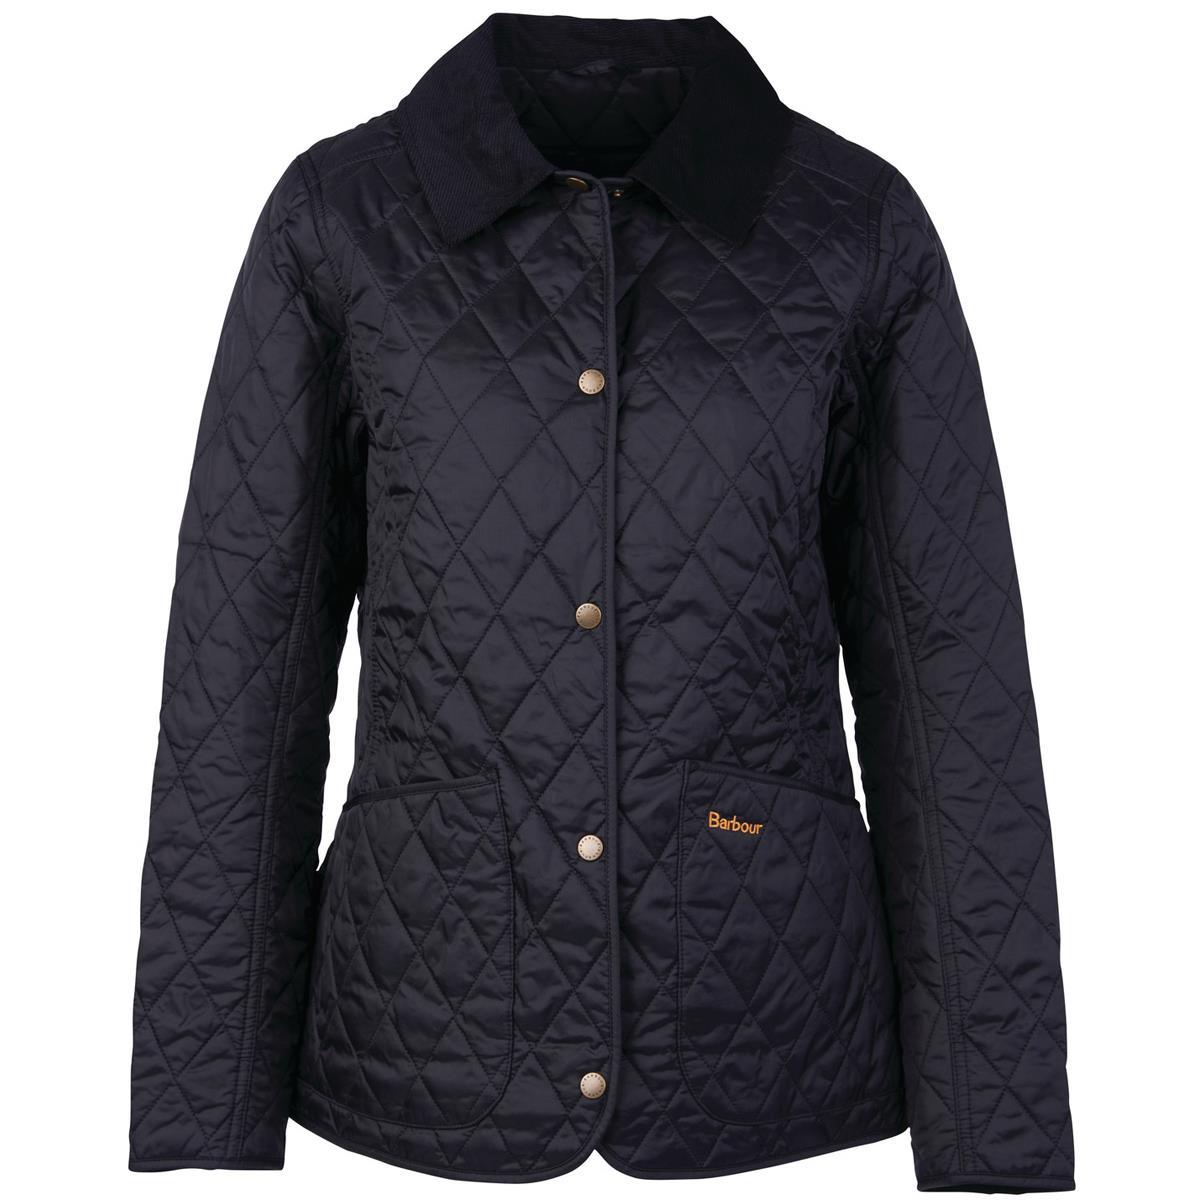 What is the Barbour Annandale Quilted Jacket's design?